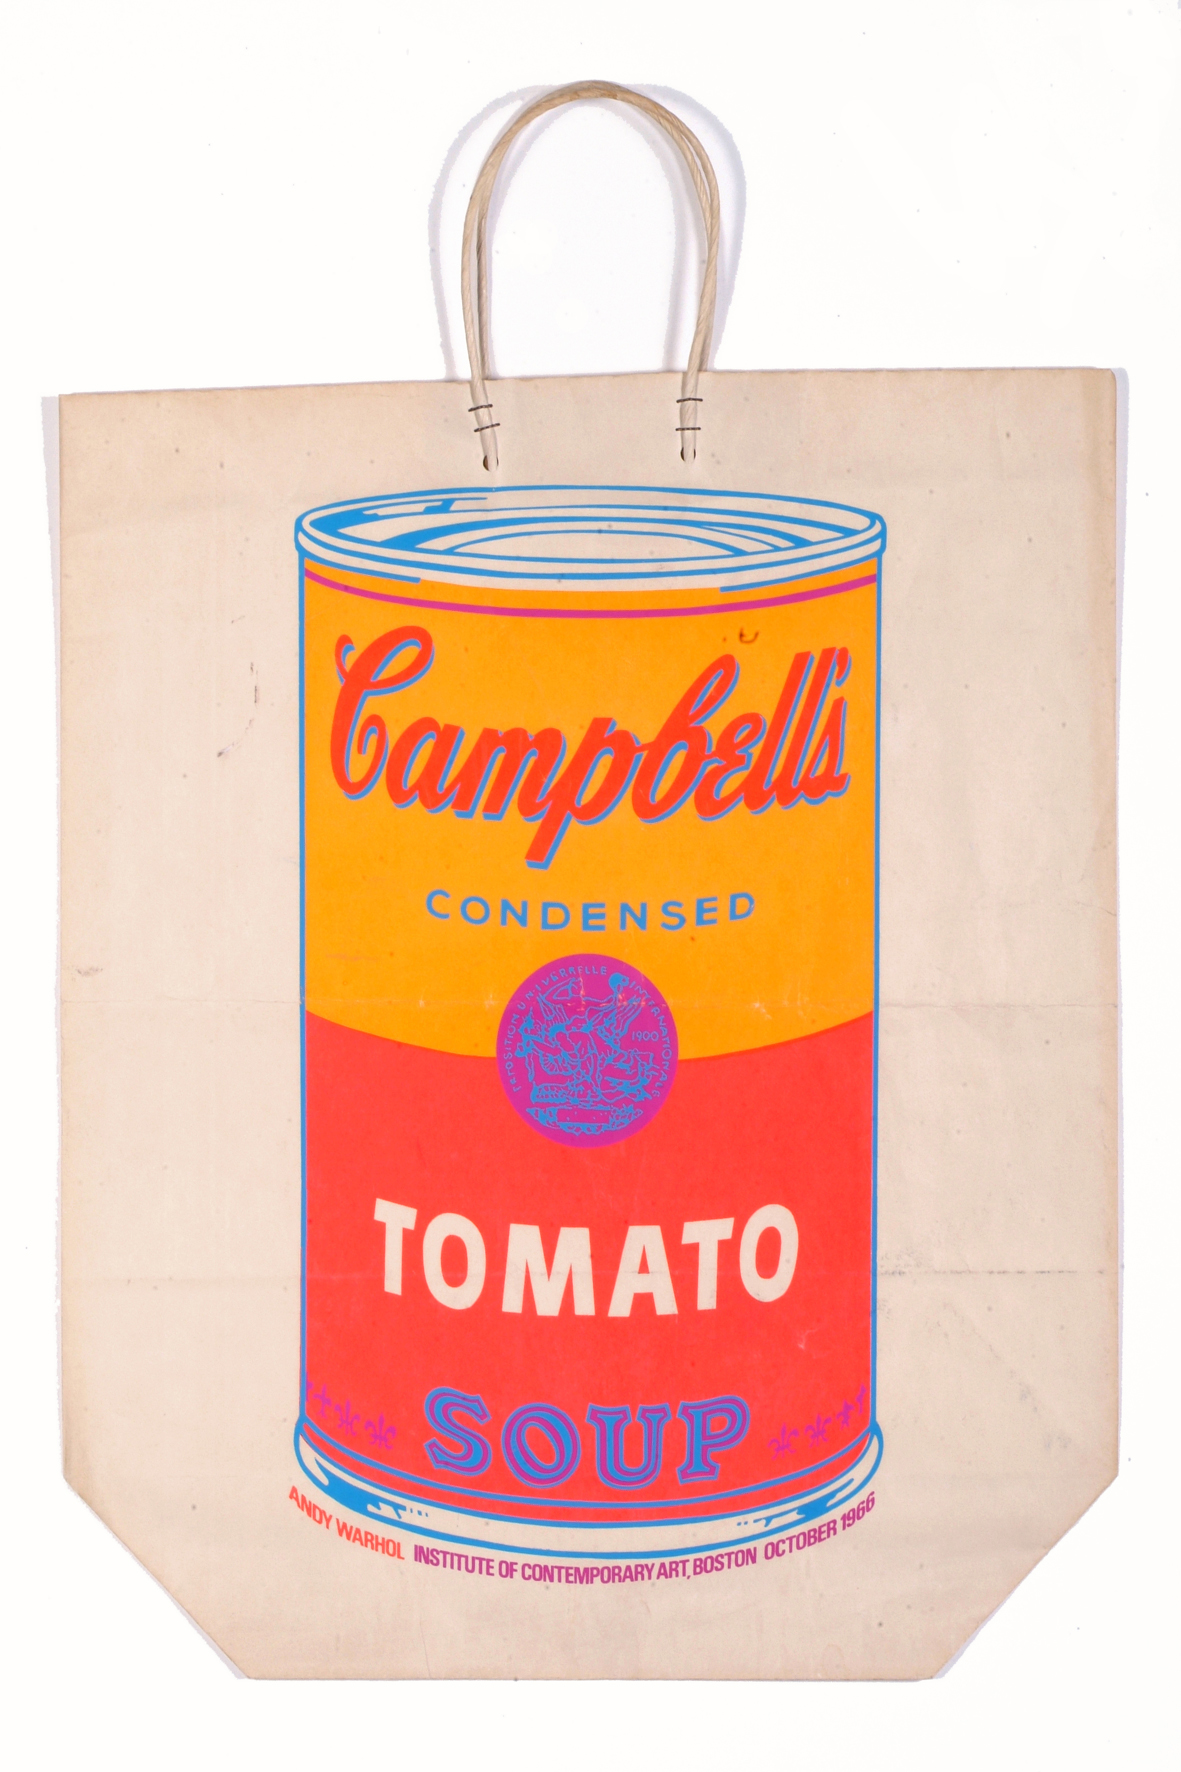 Campbell s Soup Can on Shopping Bag, 1966, screenprint on shopping bag. Collezione Rosini -Gutman